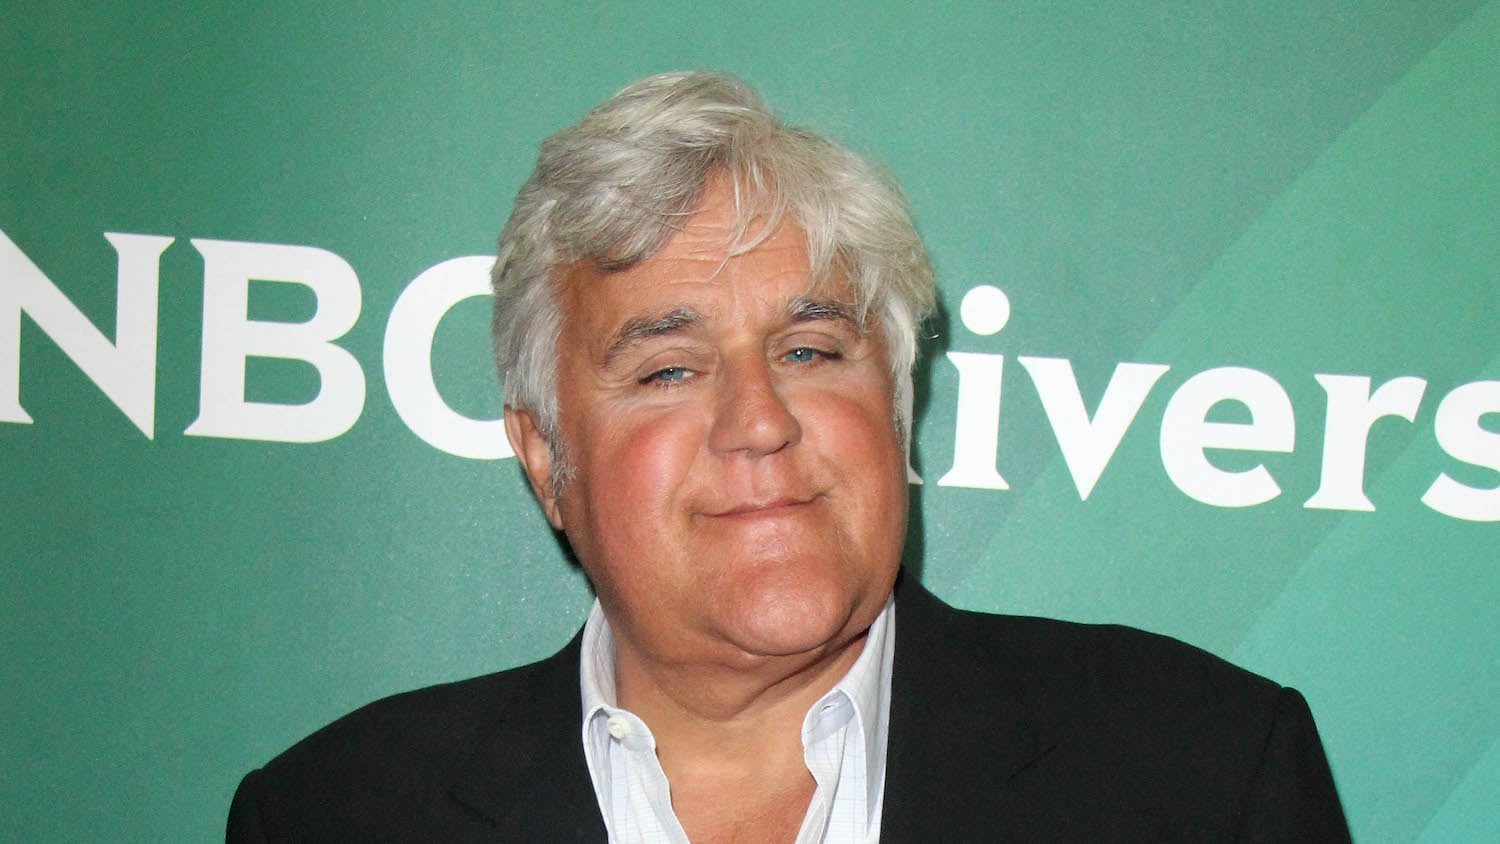 Jay Leno Seriously Burned In Gasoline Fire At Los Angeles Car Garage